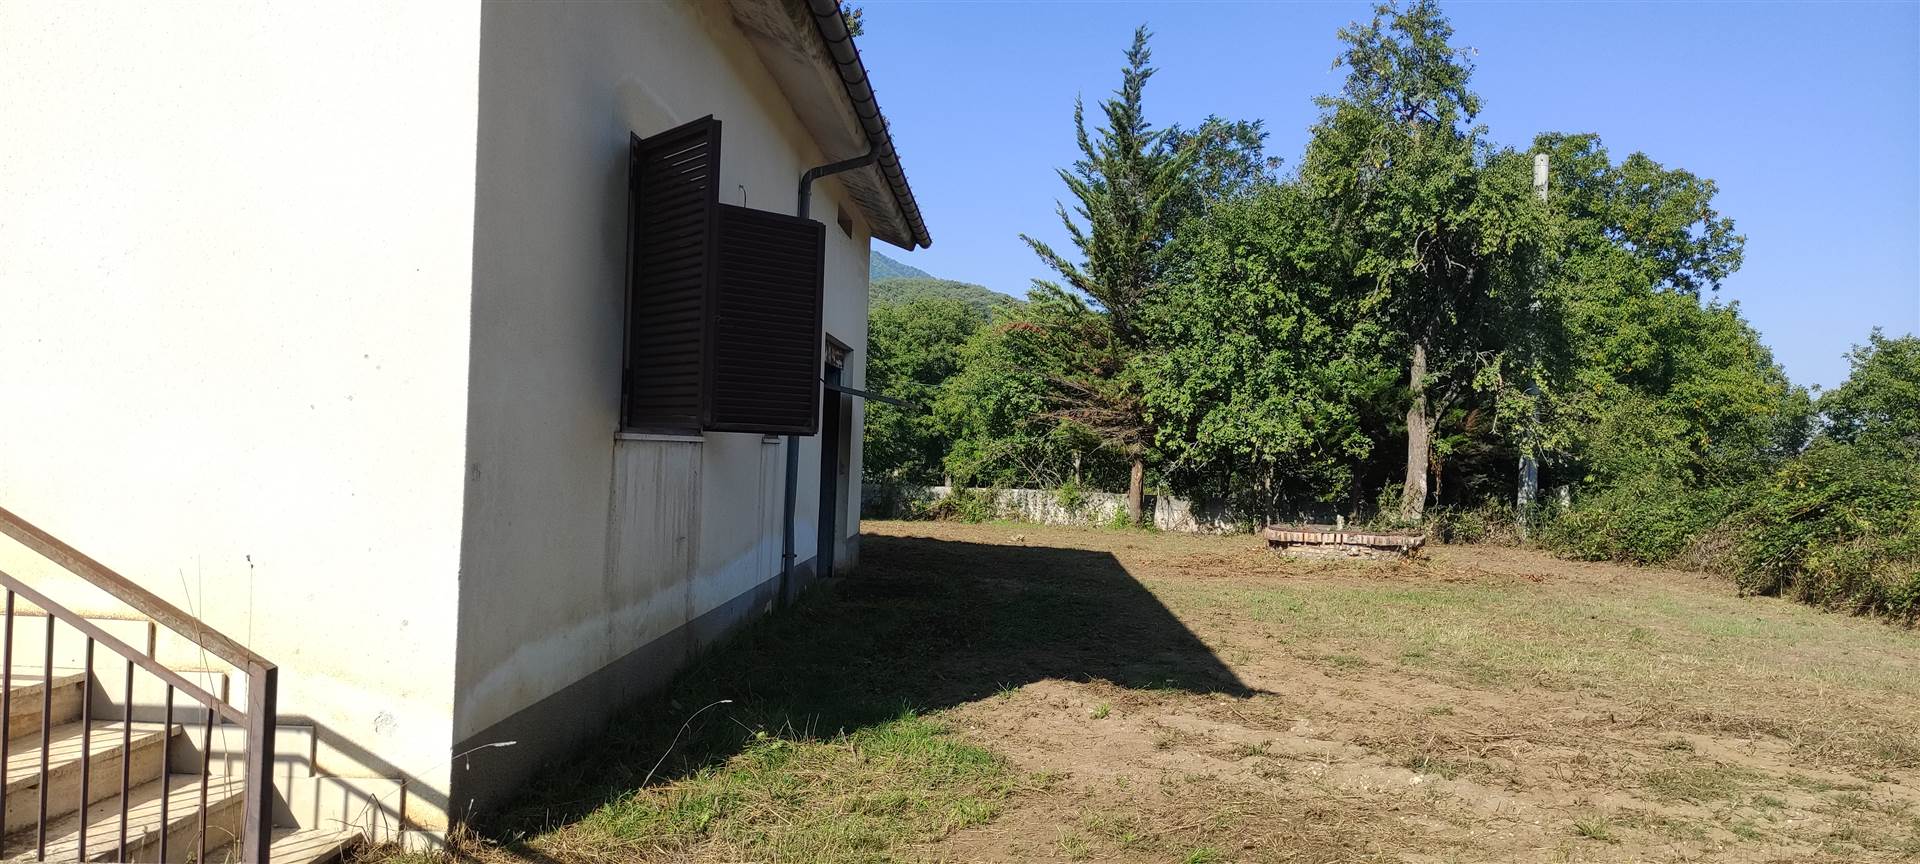 MONTELLA, Single house for sale of 110 Sq. mt., Good condition, Heating Non-existent, Energetic class: G, placed at Ground on 1, composed by: 5 Rooms,